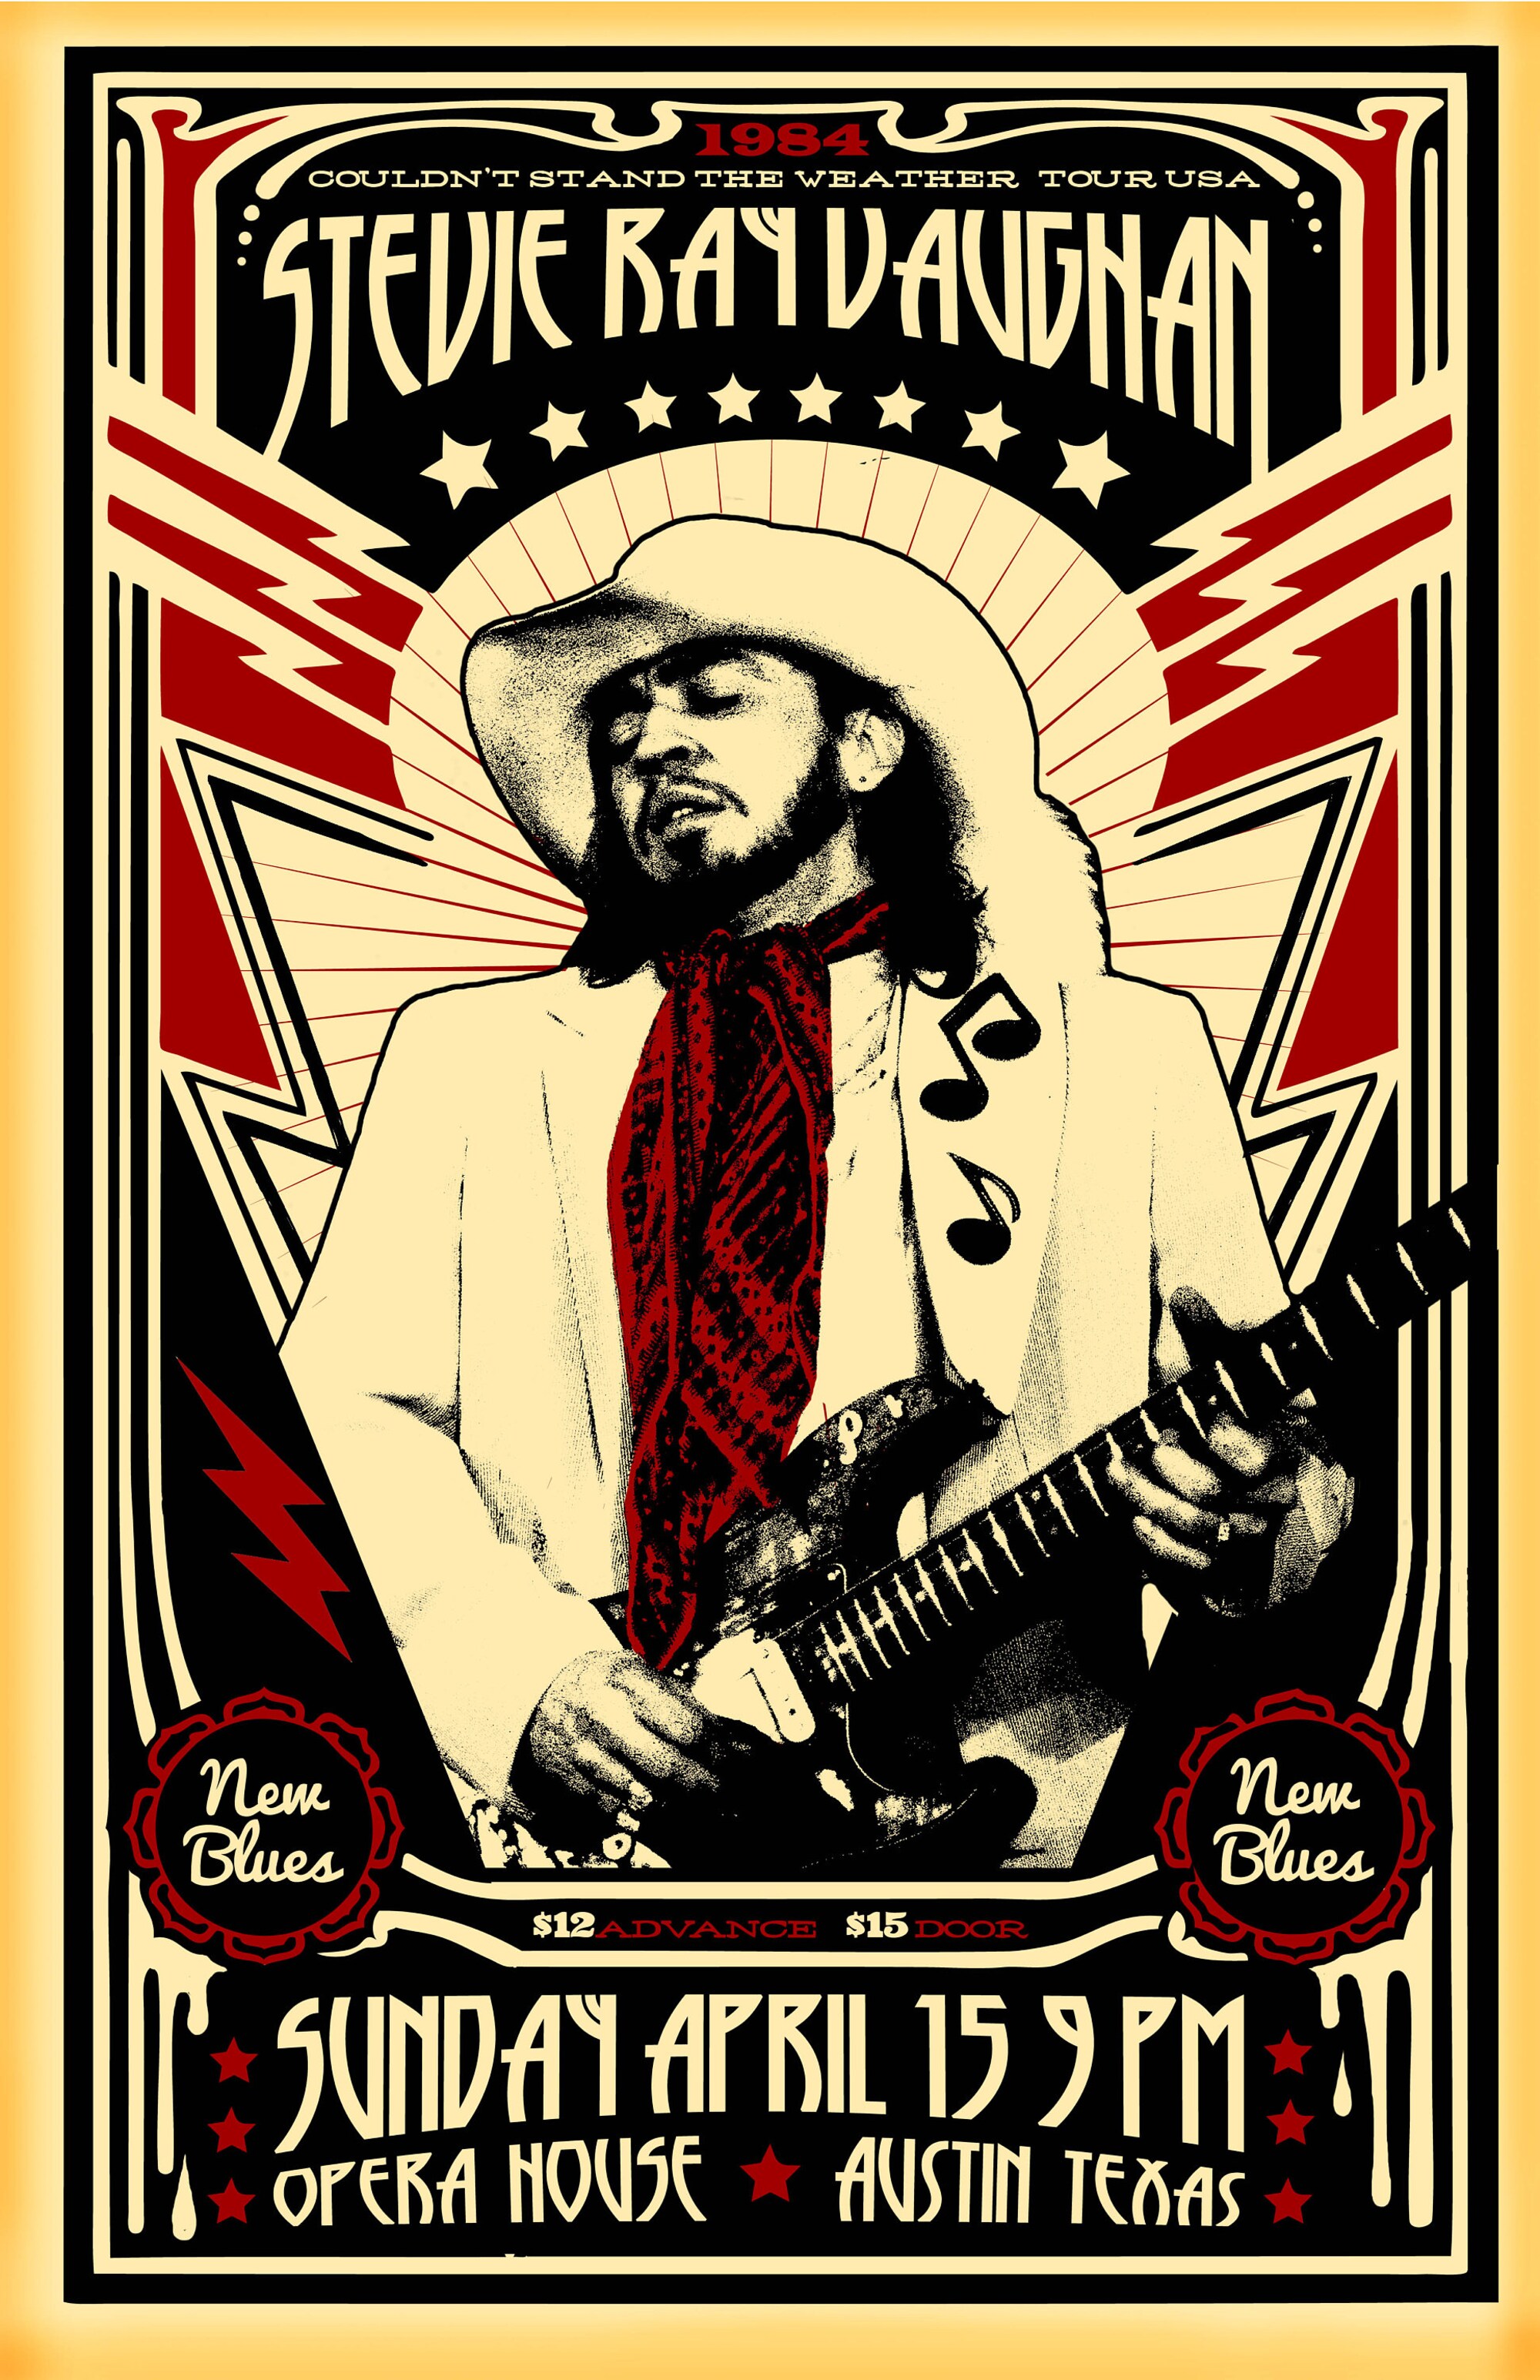 Stevie Ray Vaughan Tour Poster